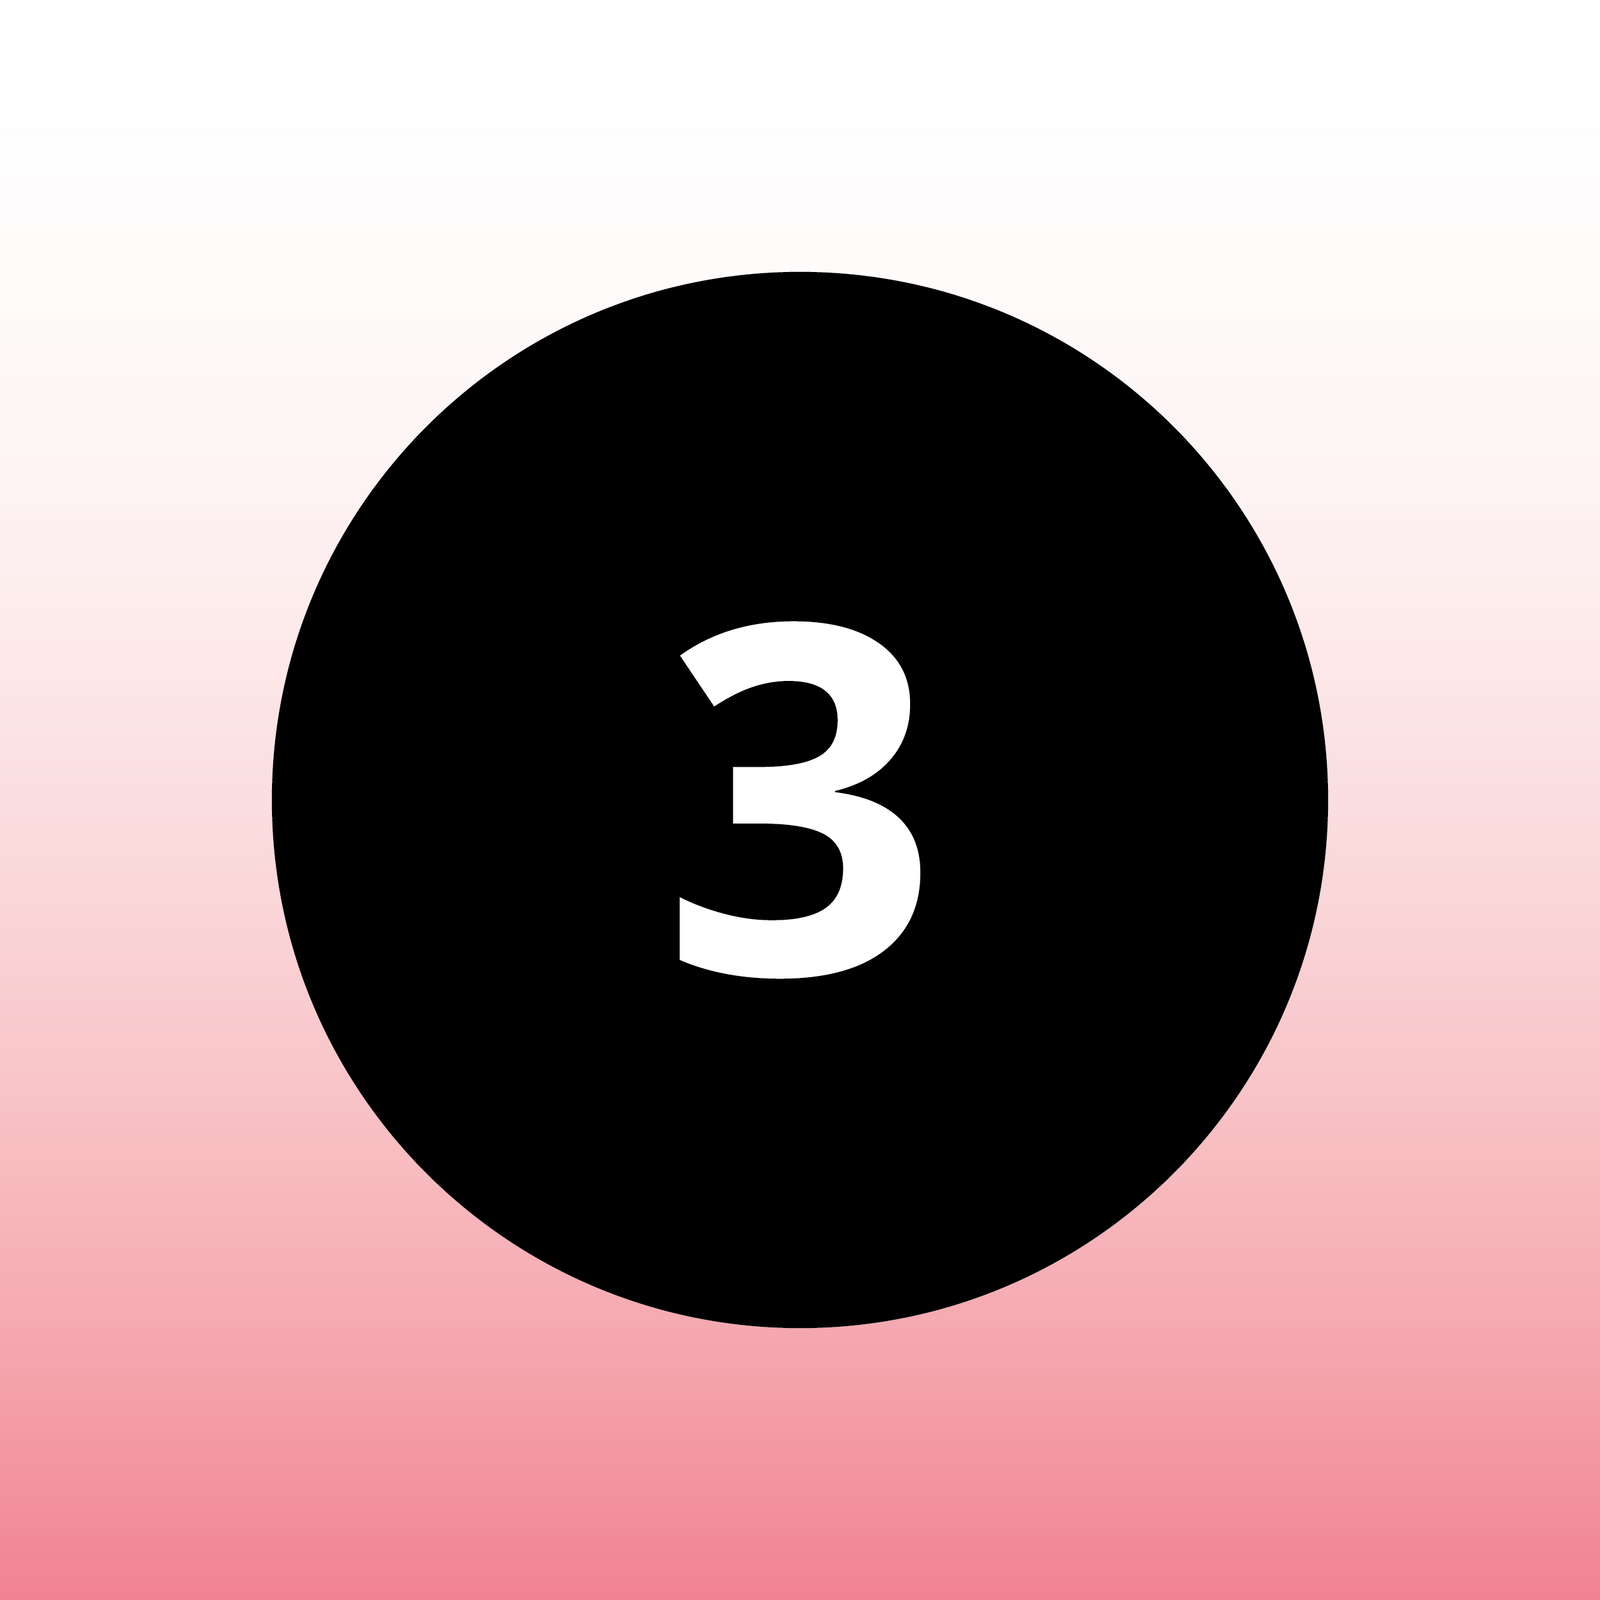 Number 3 with a black circle and a pink gradient.